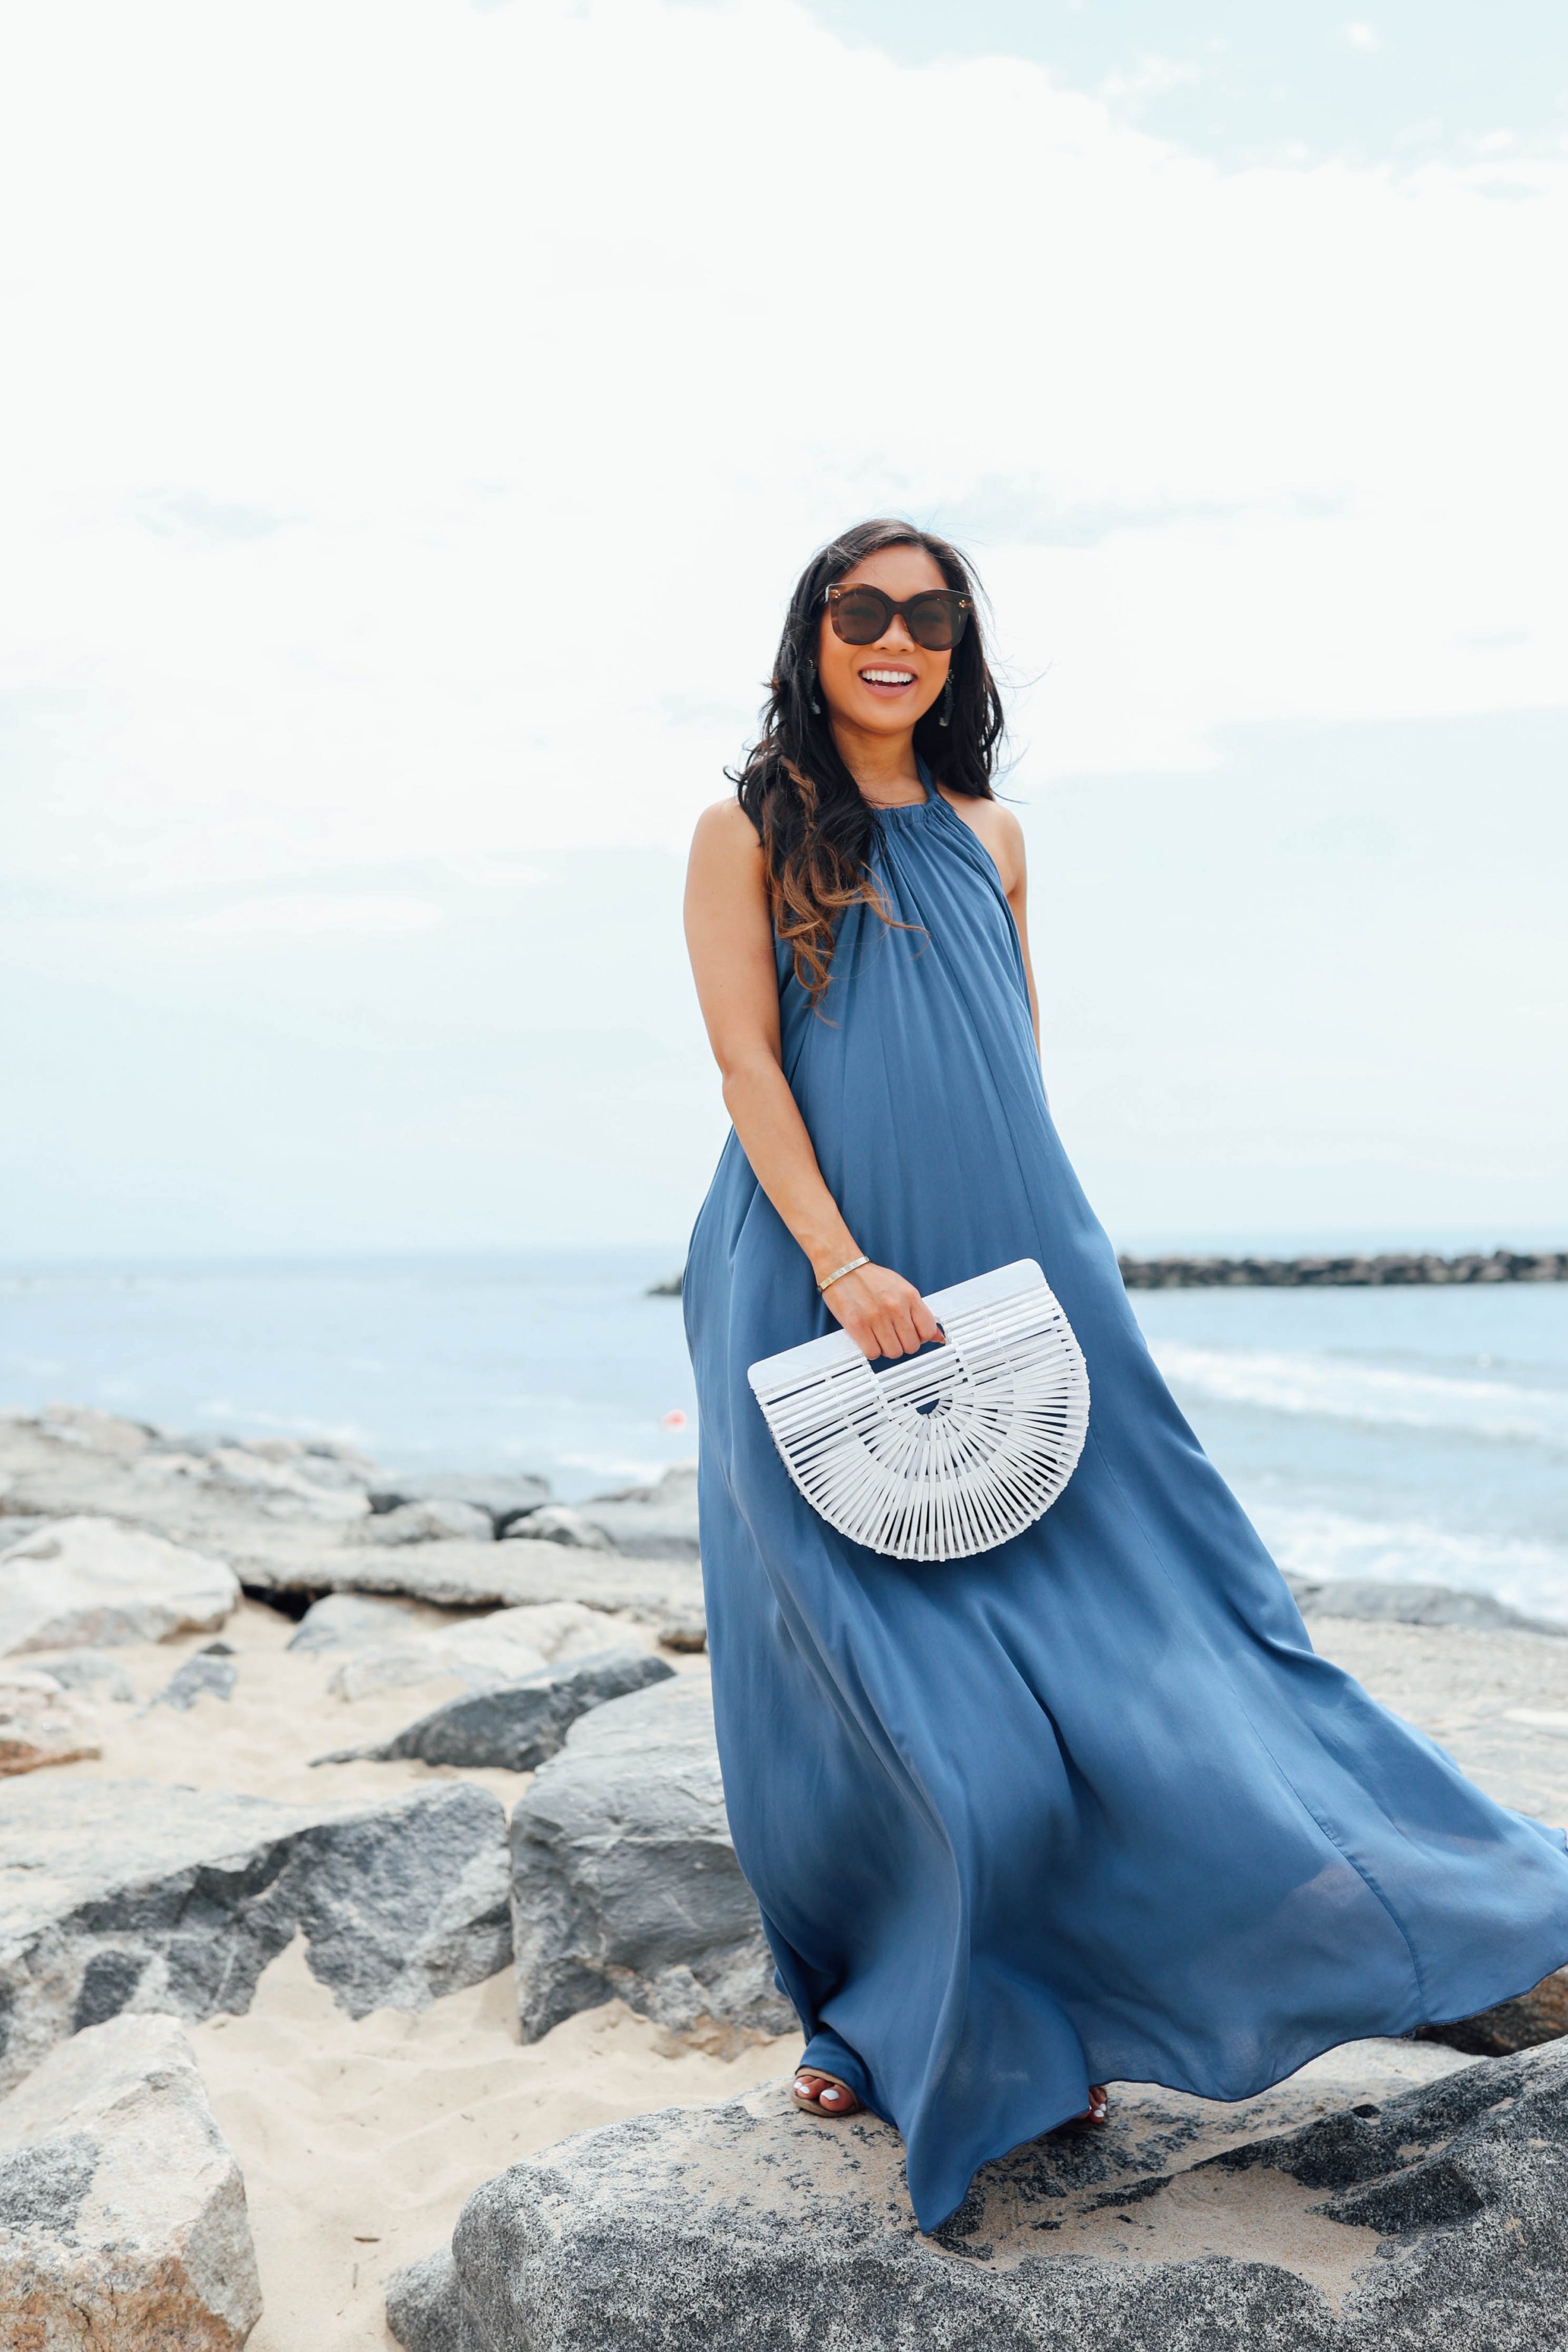 Hoang-Kim of Color & Chic wears a seadrift halter pocketed dress from Vici Dolls with Celine sunglasses